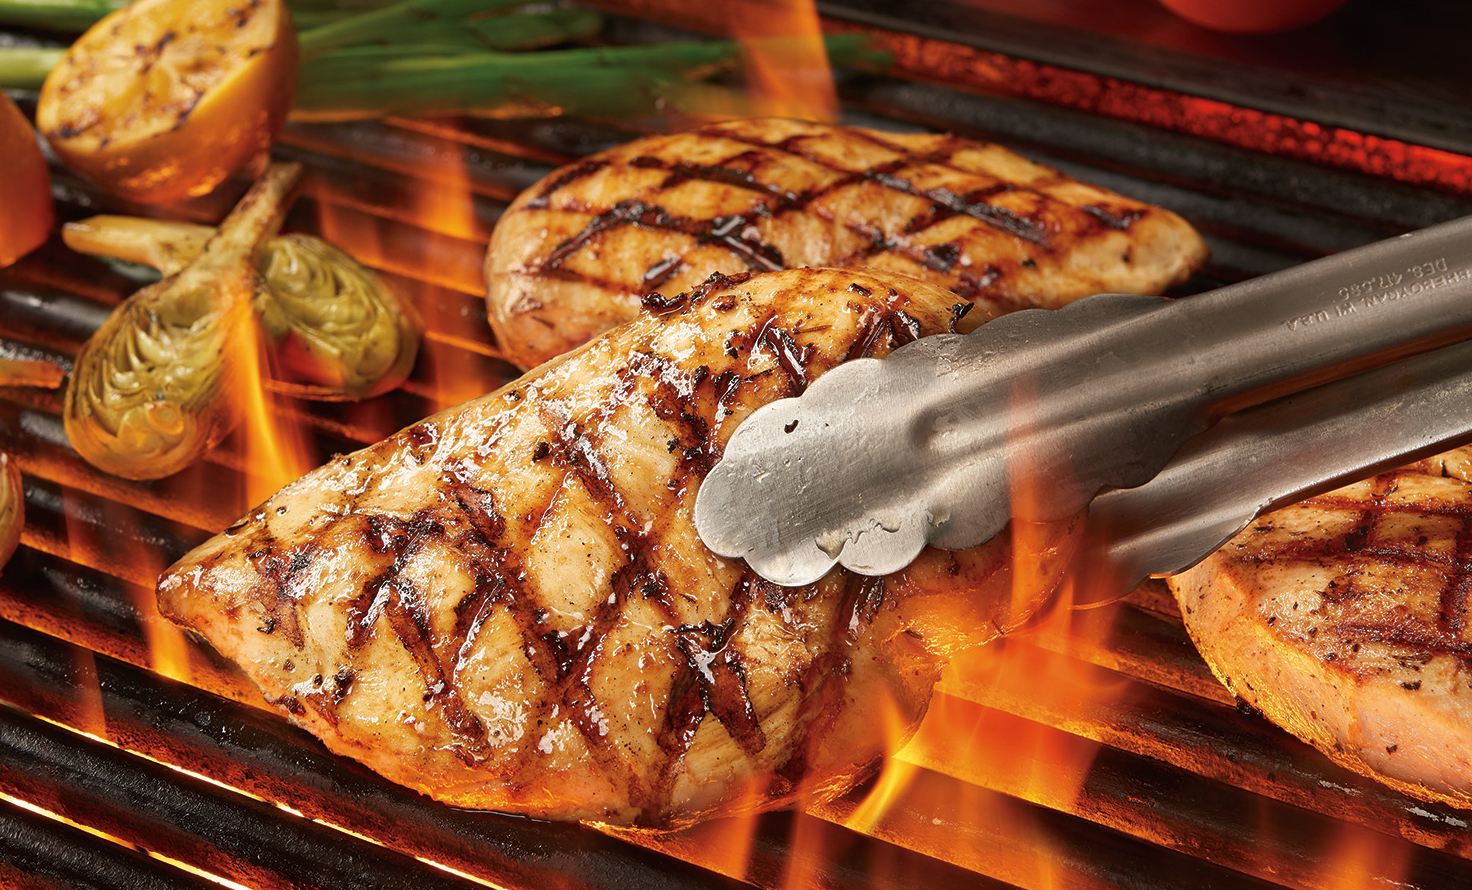 HARVESTLAND® Organic Grilled Chicken Breast with Grilled Lemon and Fire-Roasted Artichoke Hearts